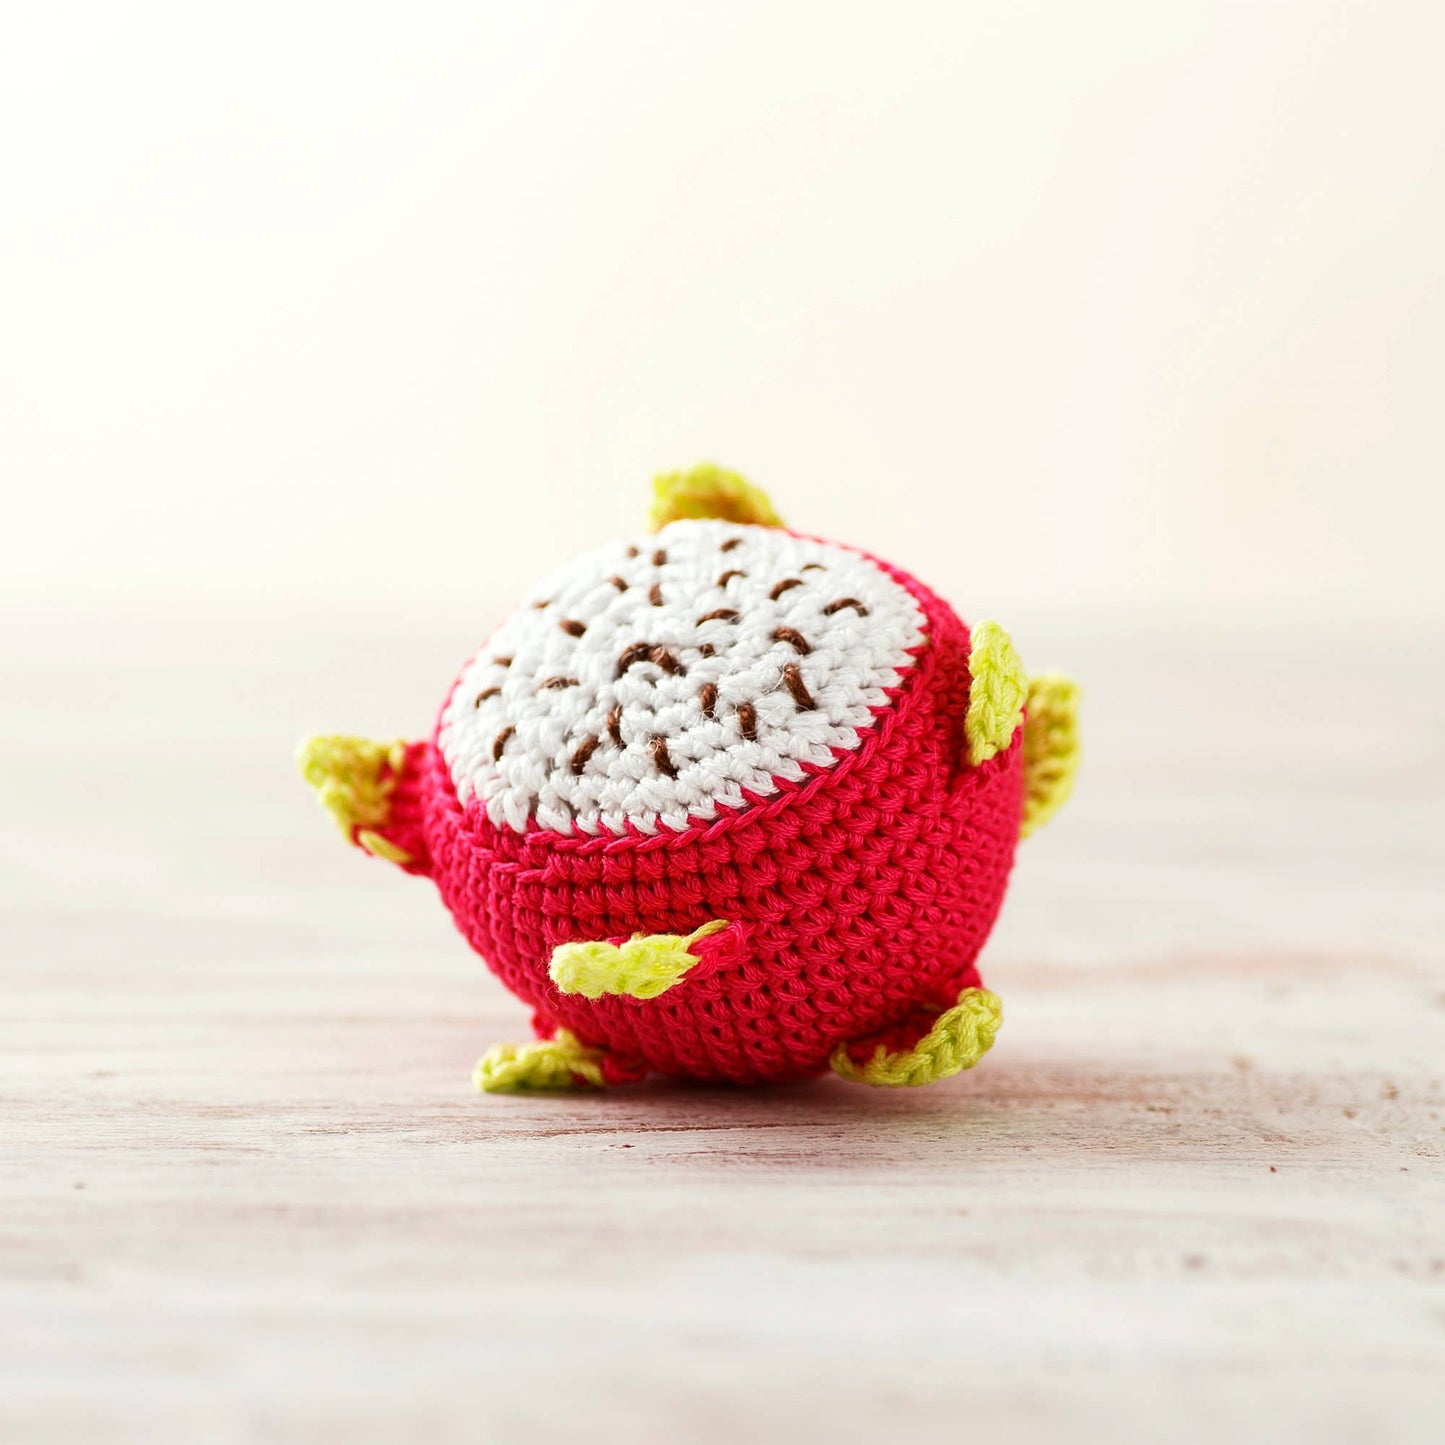 Disney Tsum Tsum Crochet Collection to be released in Japan